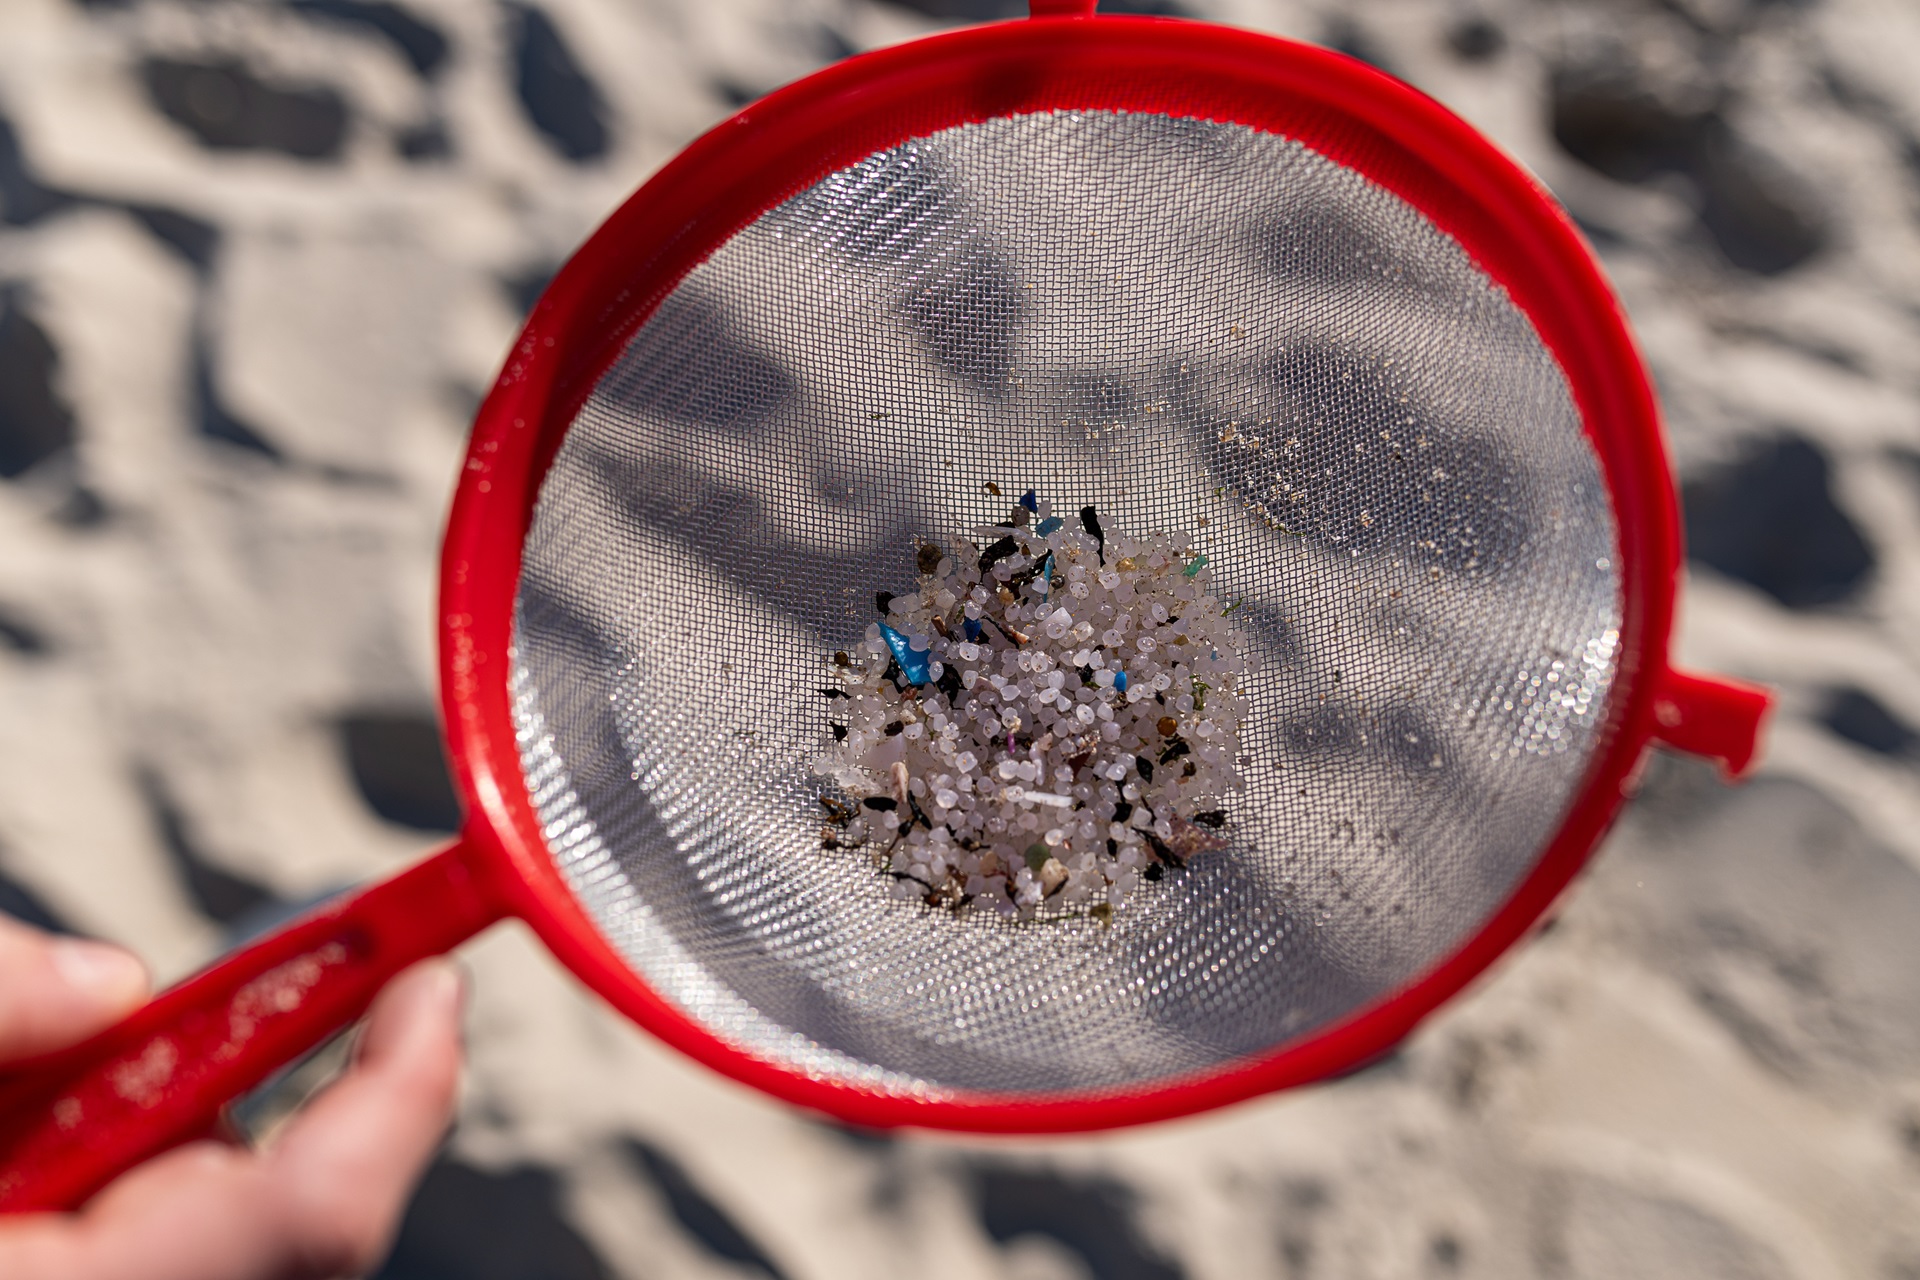 What are the plastic pellets that have washed up on the coasts of Galicia?